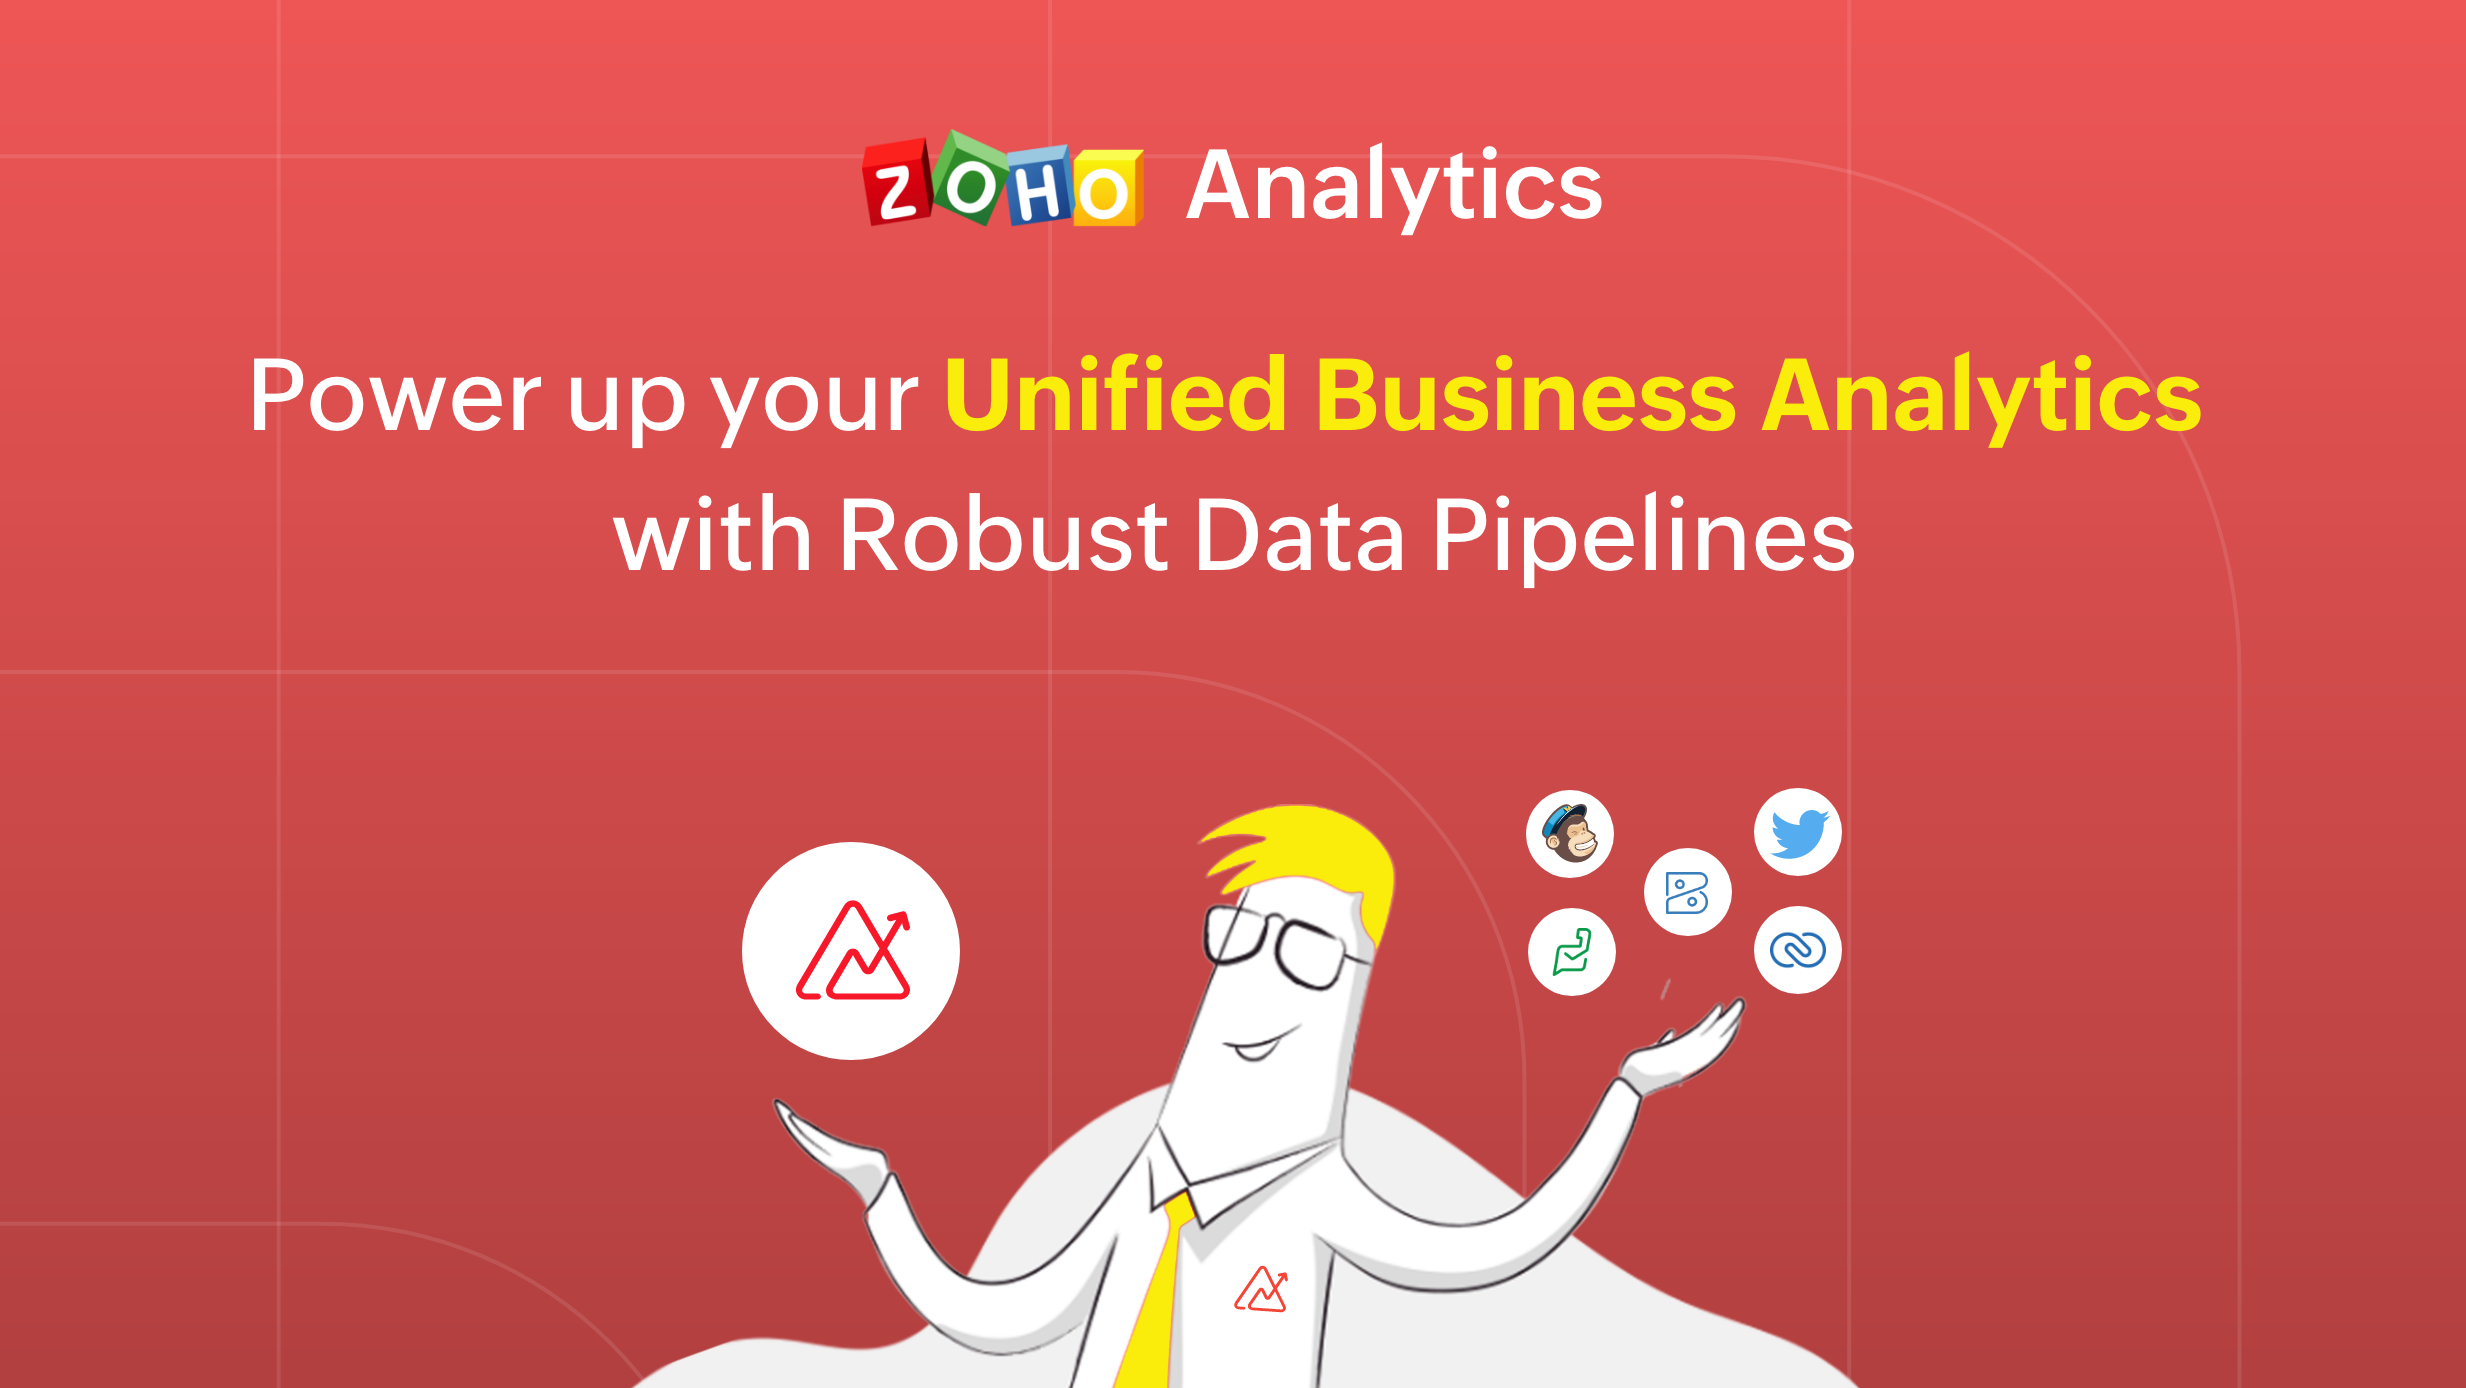 Power up your Unified Business Analytics with Robust Data Pipelines